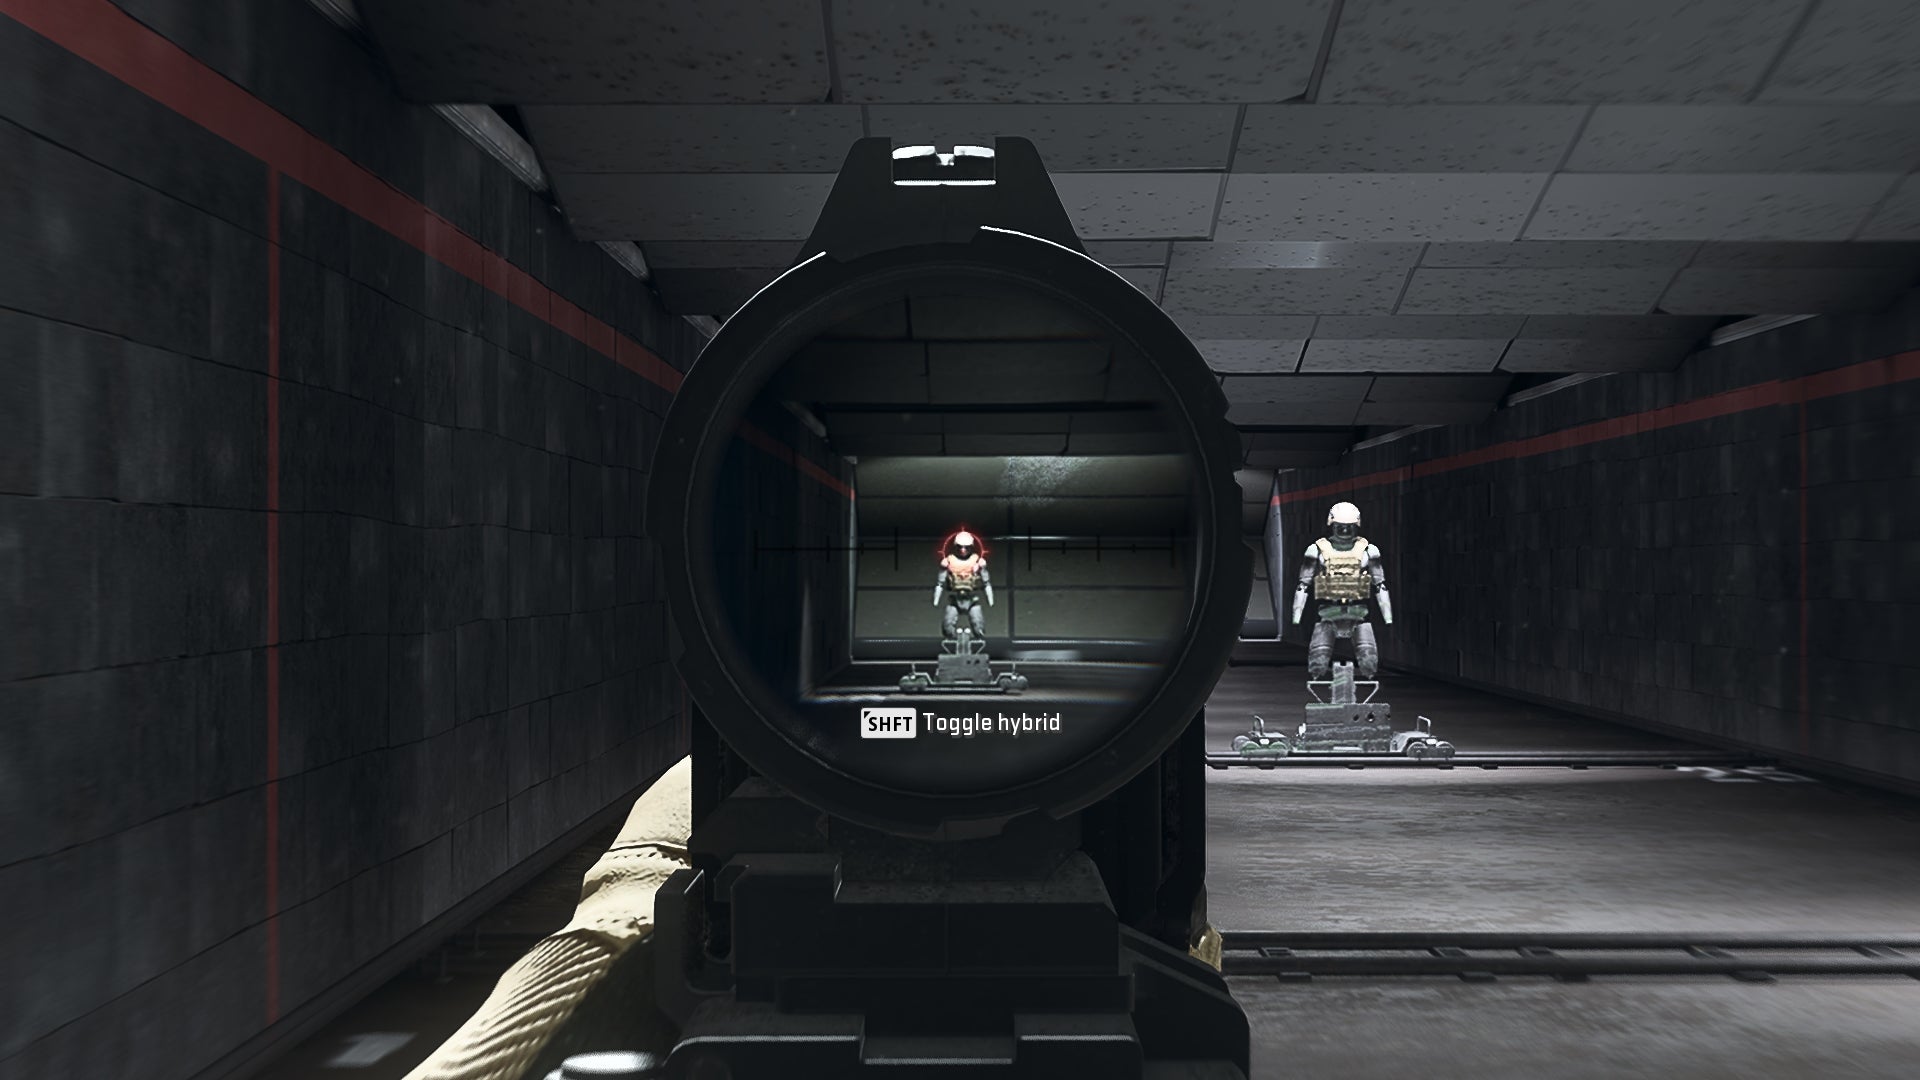 The player in Warzone 2.0 aims at a training dummy using the DR582 Hybrid Sight optic attachment.